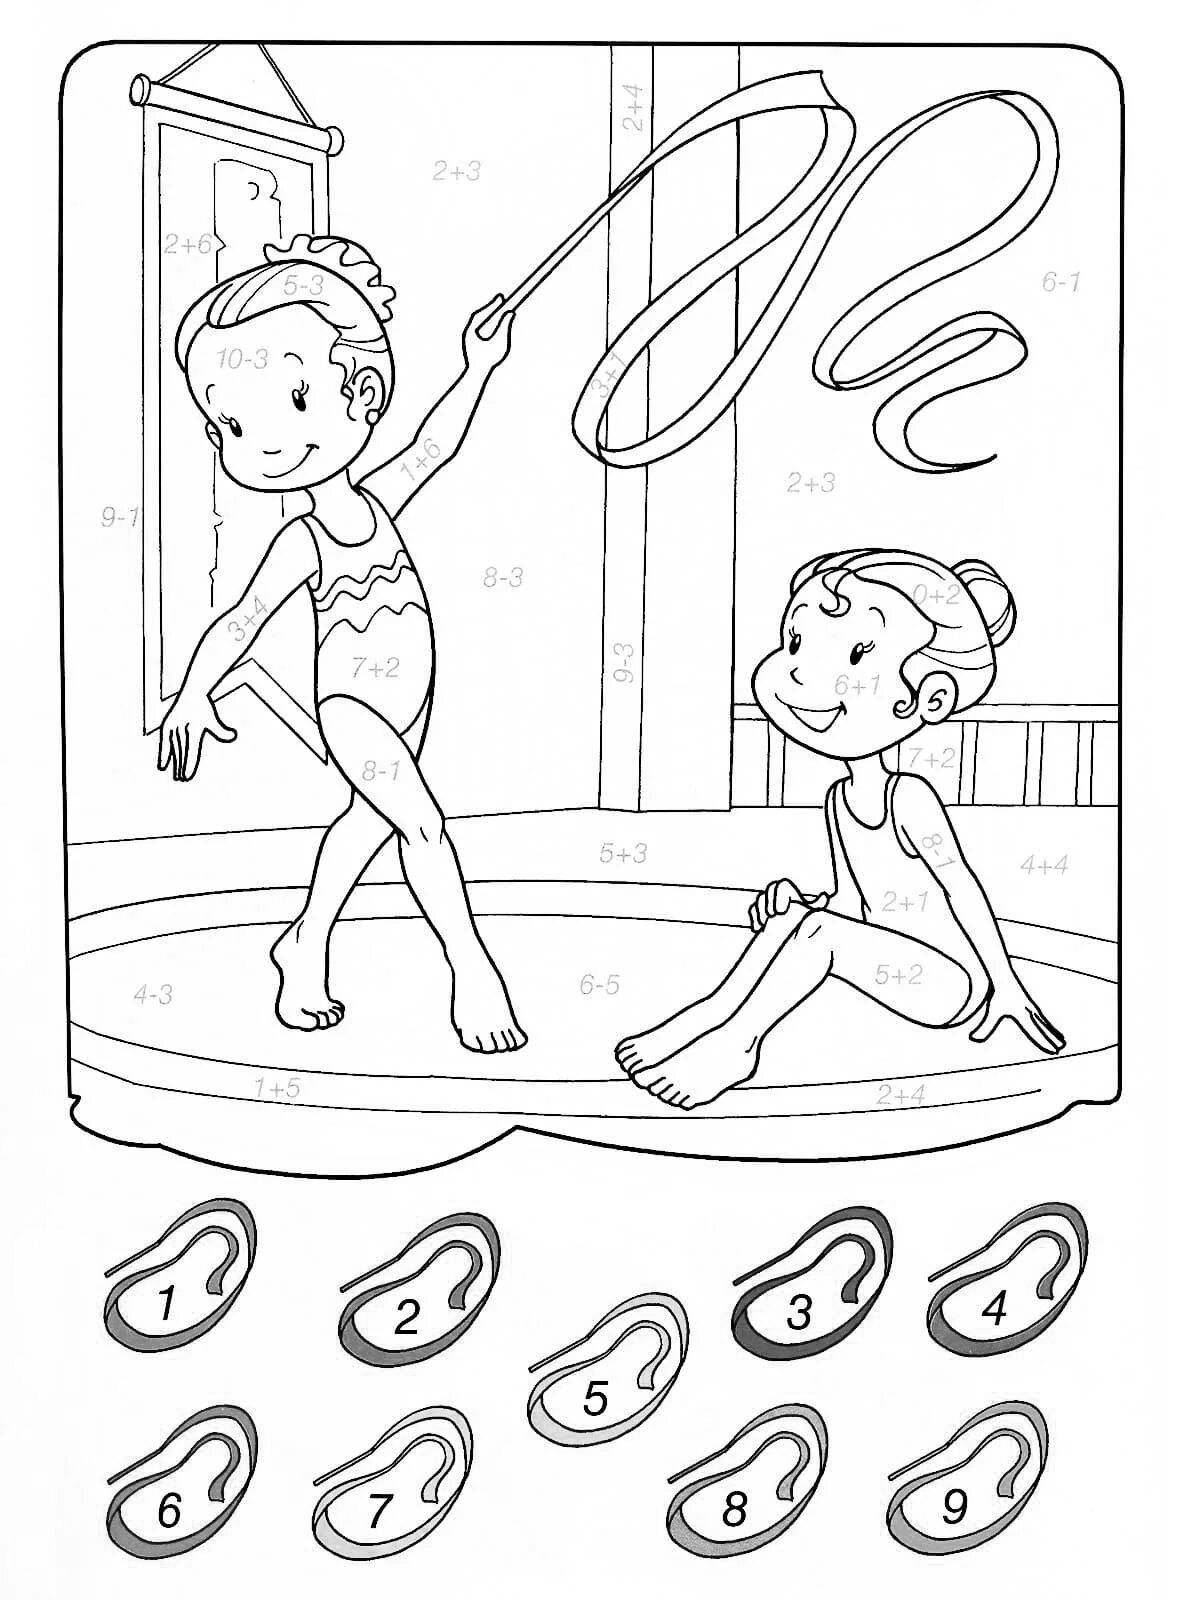 Dynamic sports coloring book for kids 6-7 years old